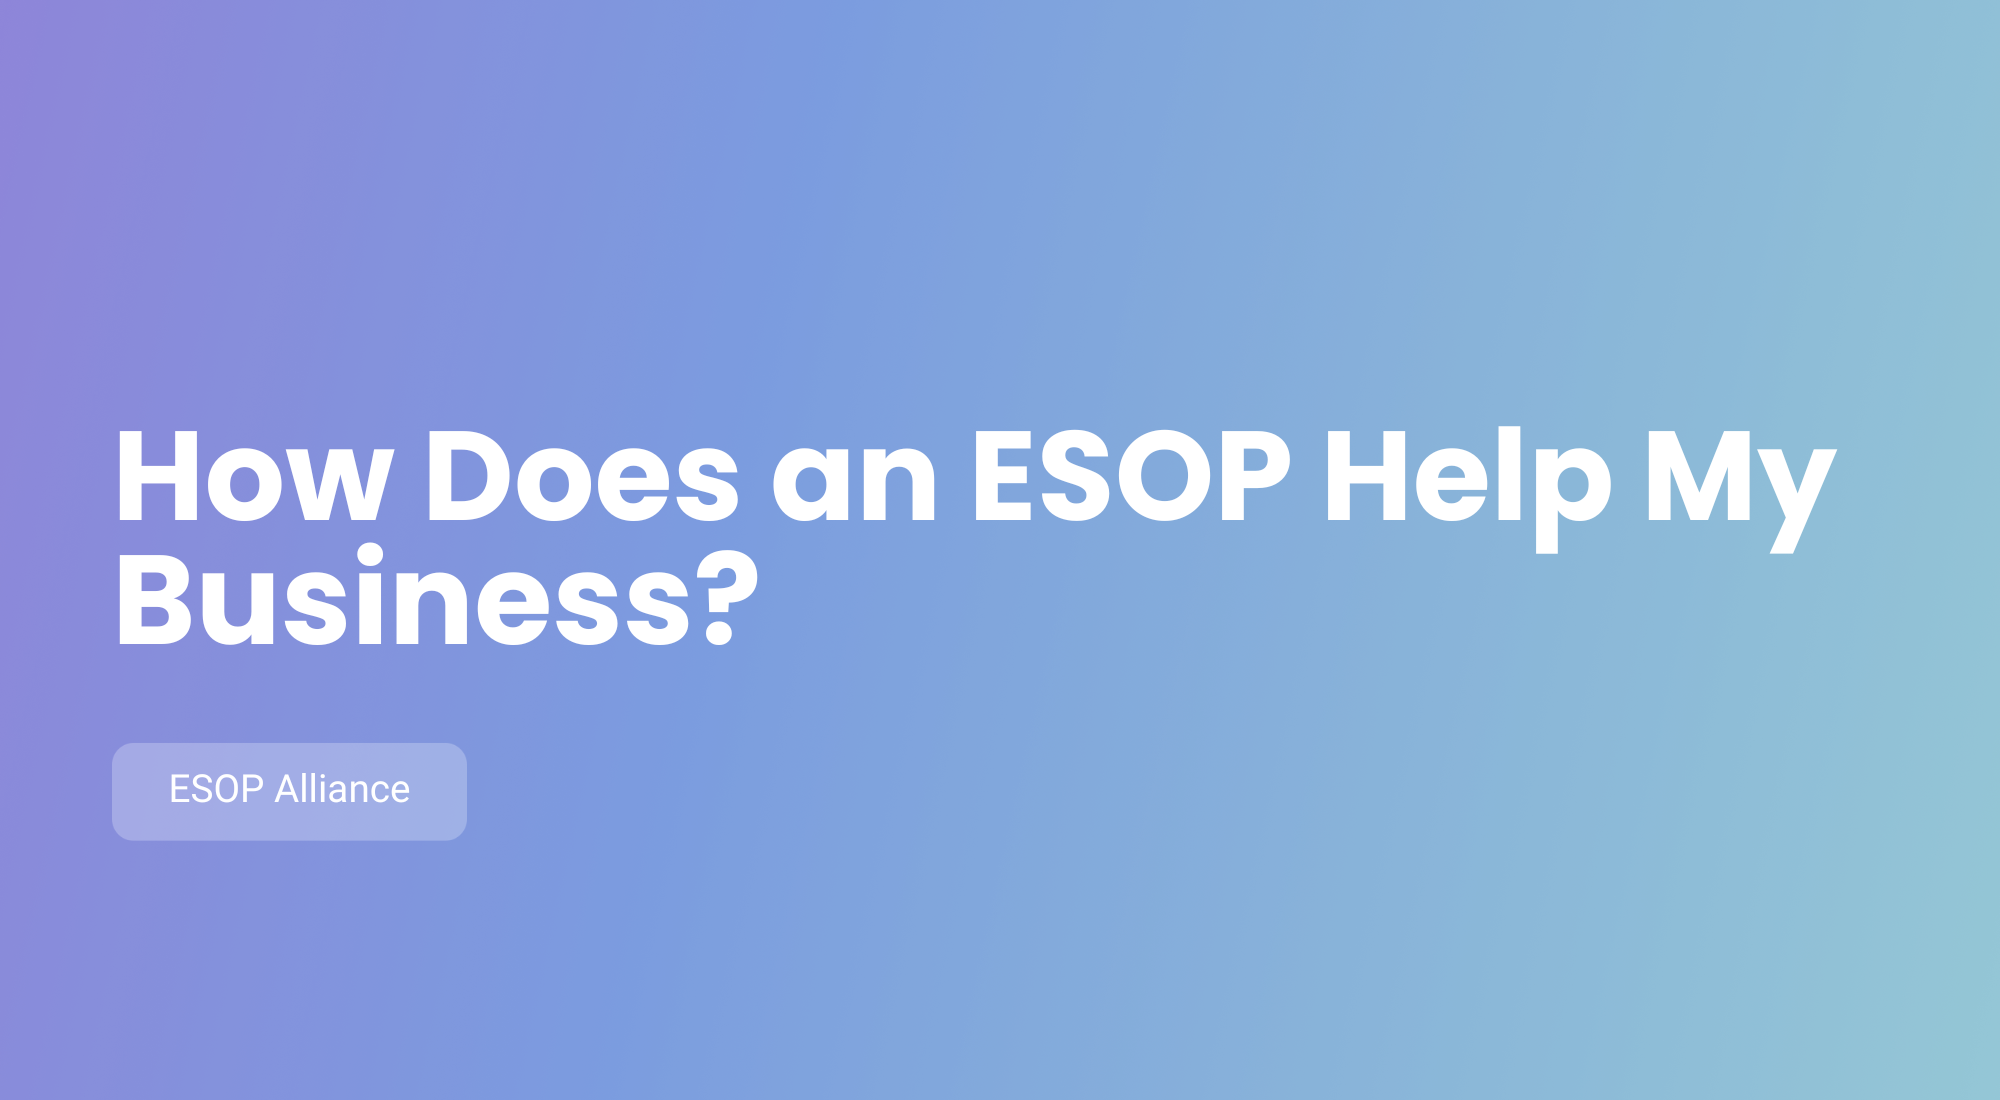 How Does an ESOP Help My Business?